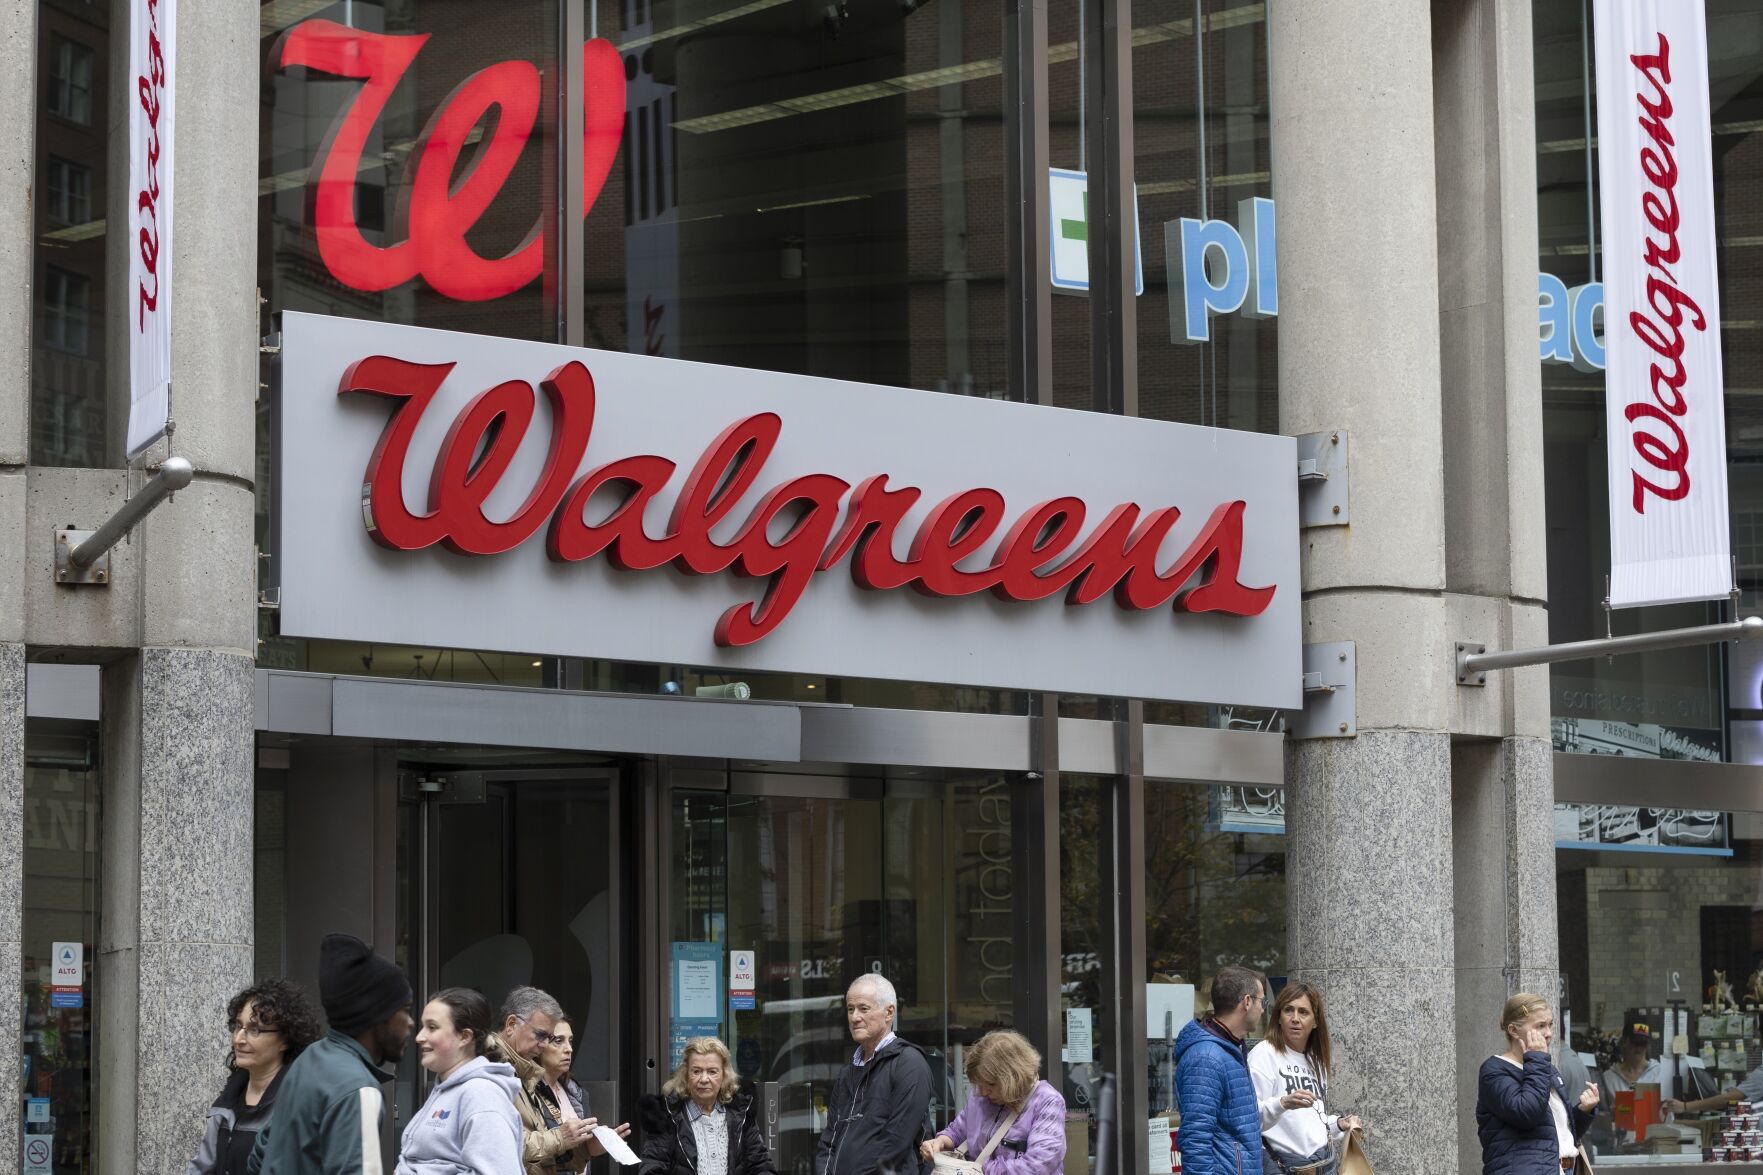 <p>FILE - The entrance to a Walgreens is seen on Oct. 14, 2022, in Boston. Walgreens dove deeper into the health care sector on Monday, Nov. 7, when its VillageMD unit announced it would acquire another primary and urgent care provider, Summit Health-CityMD, in a deal worth close to $9 billion. (AP Photo/Michael Dwyer, File)</p>   PHOTO CREDIT: Michael Dwyer - staff, AP